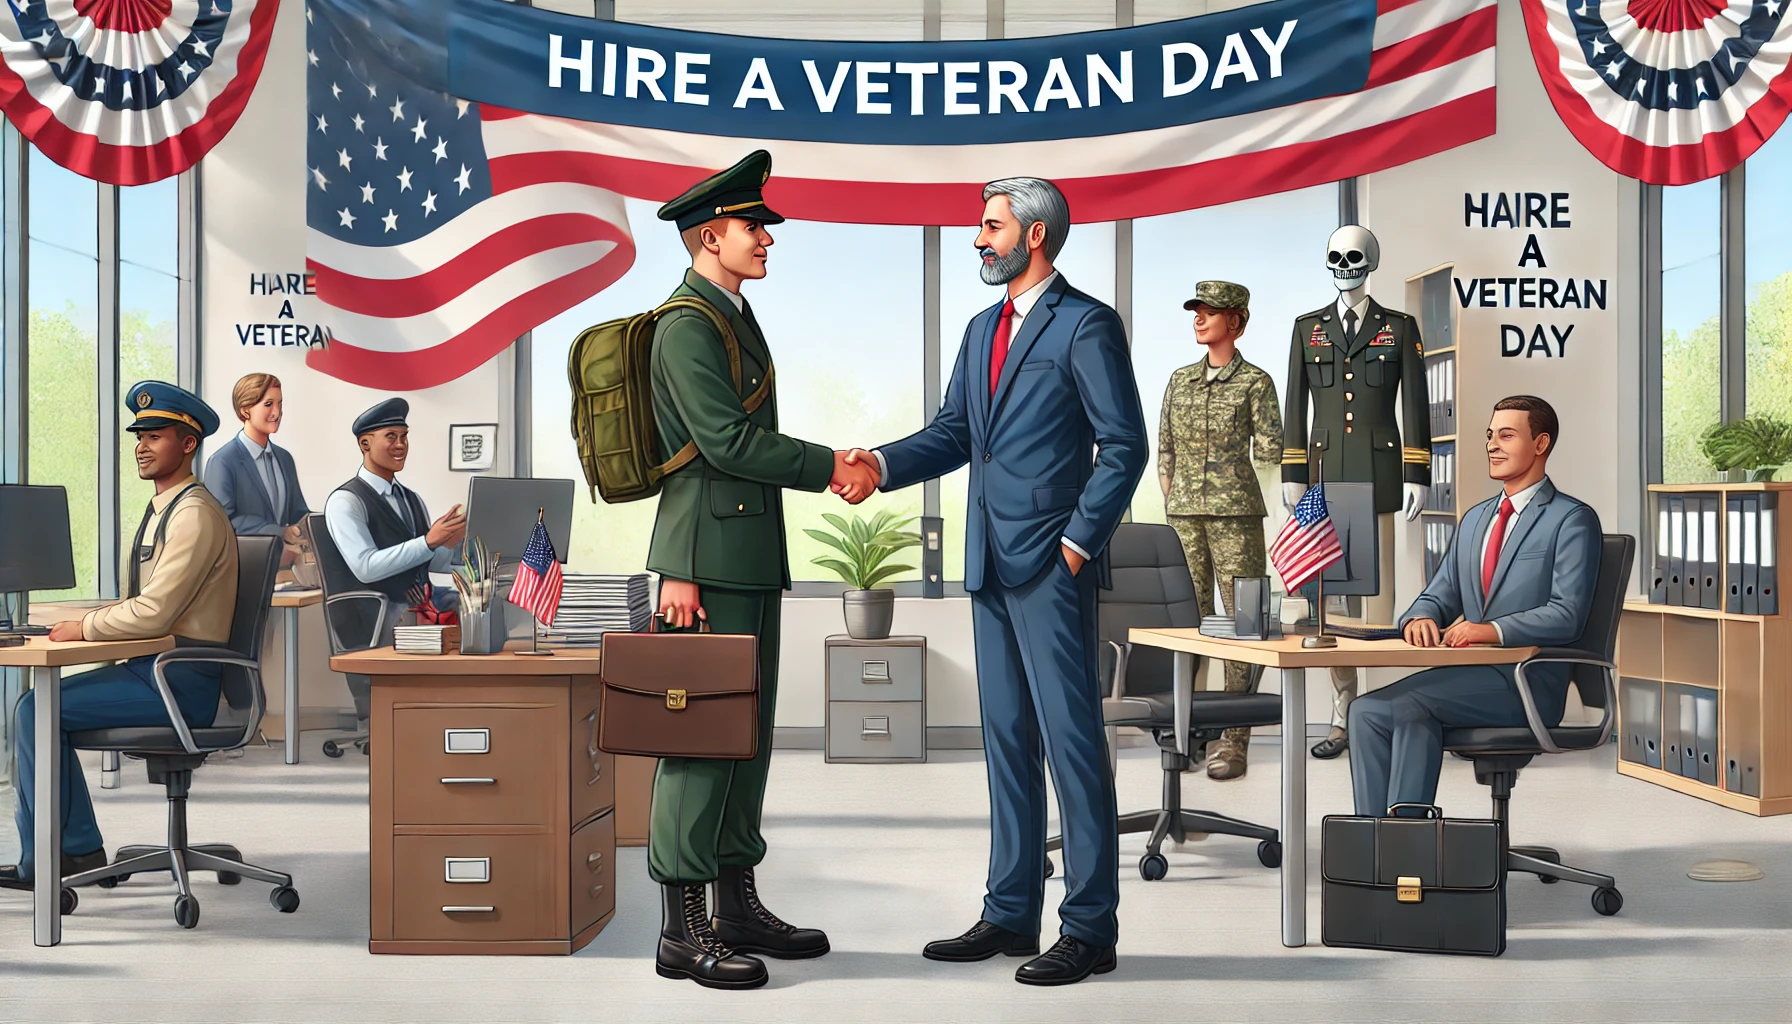 National Hire A Veteran Day